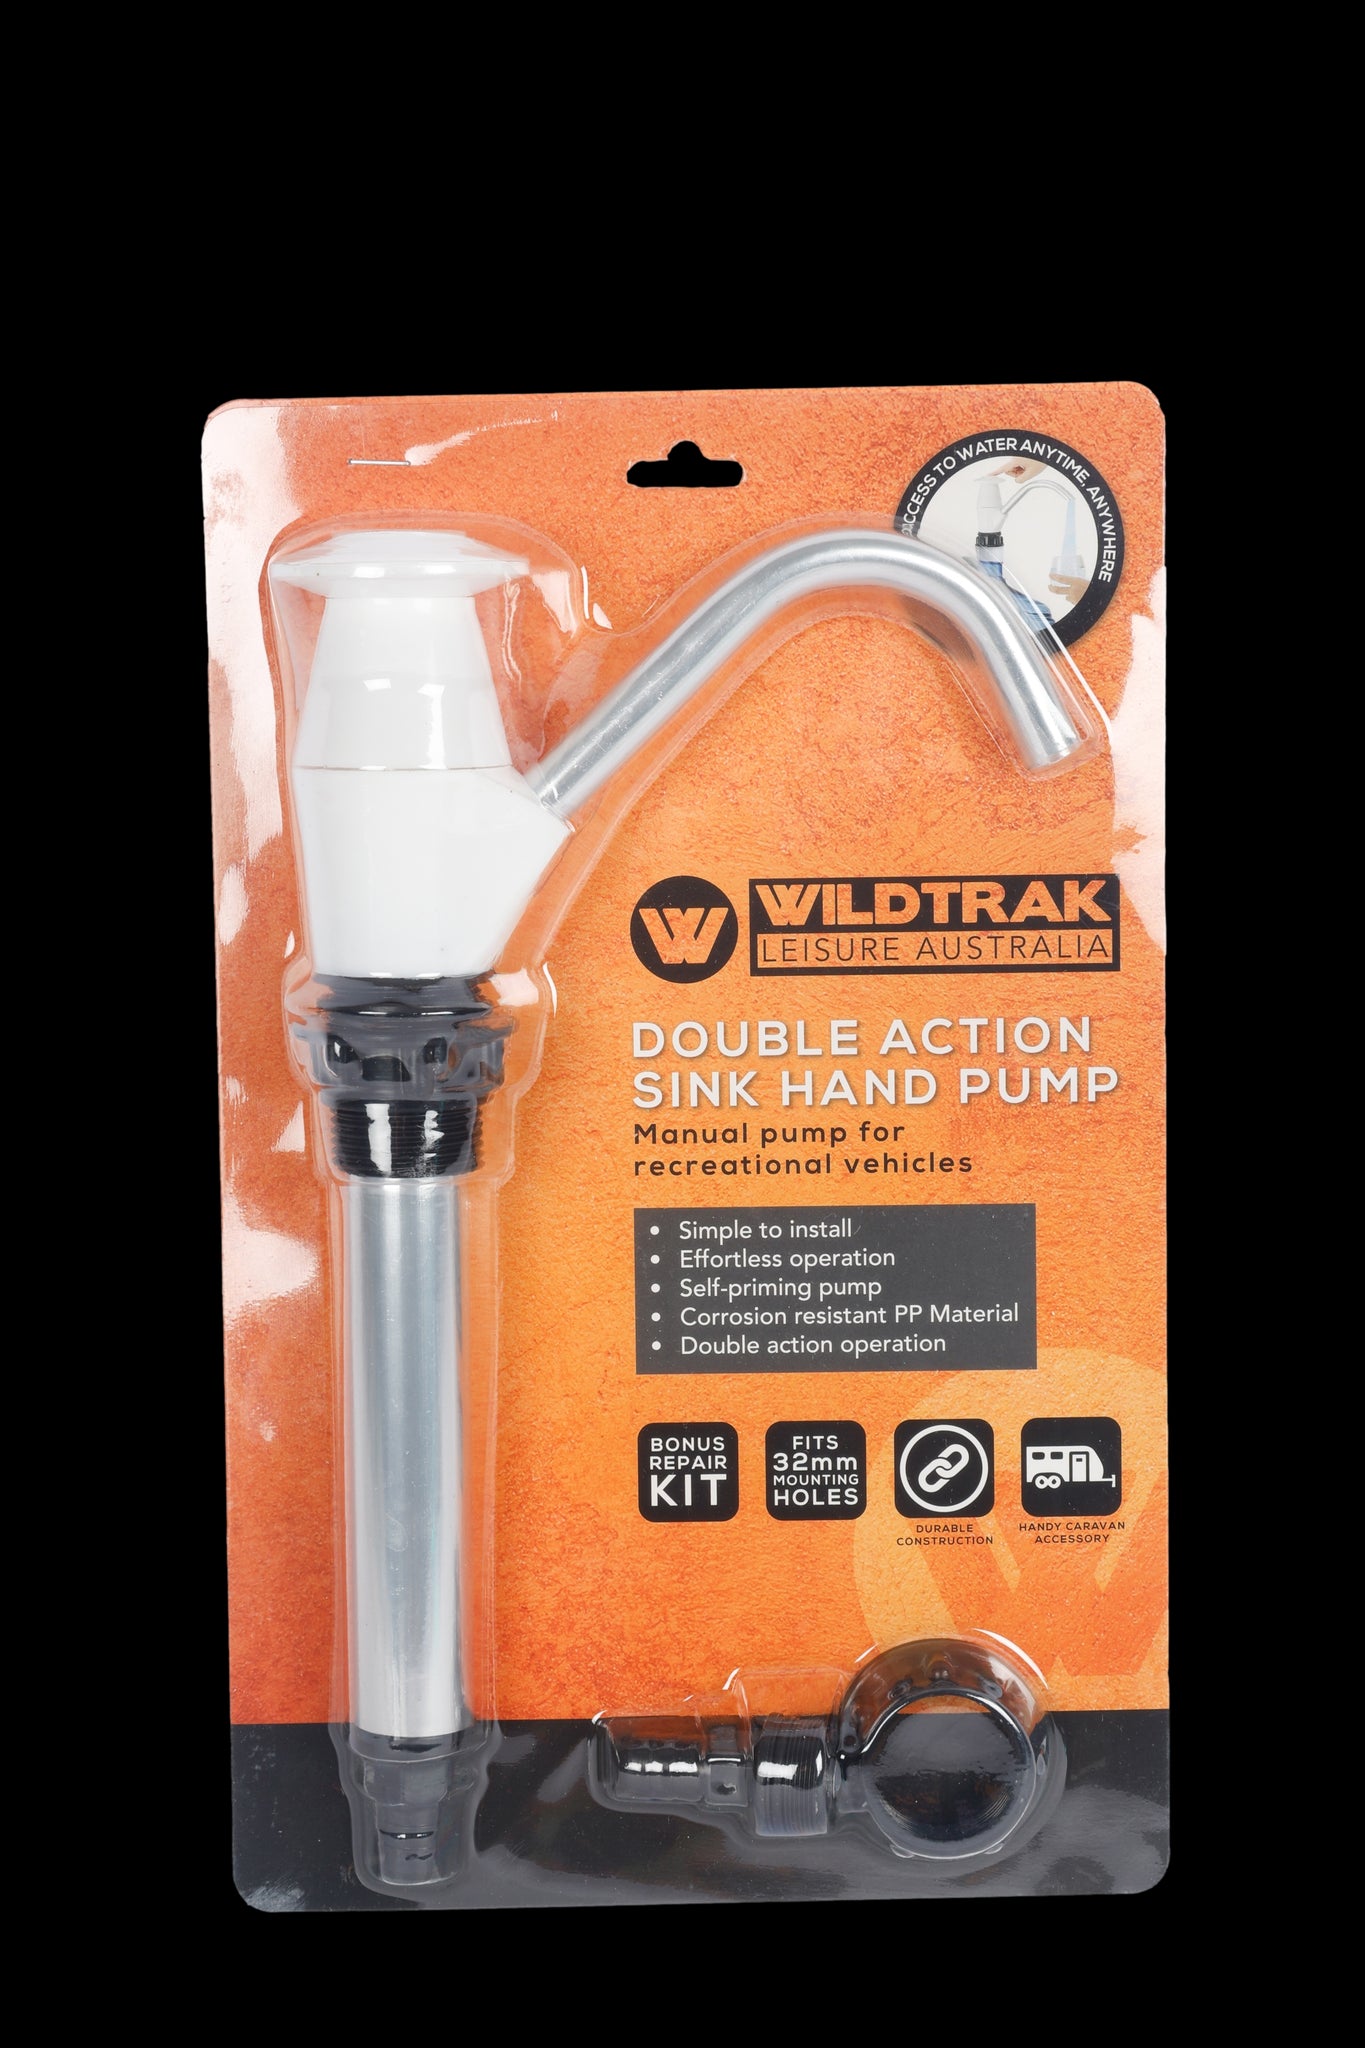 DOUBLE ACTION SINK HAND PUMP WITH REPAIR KIT